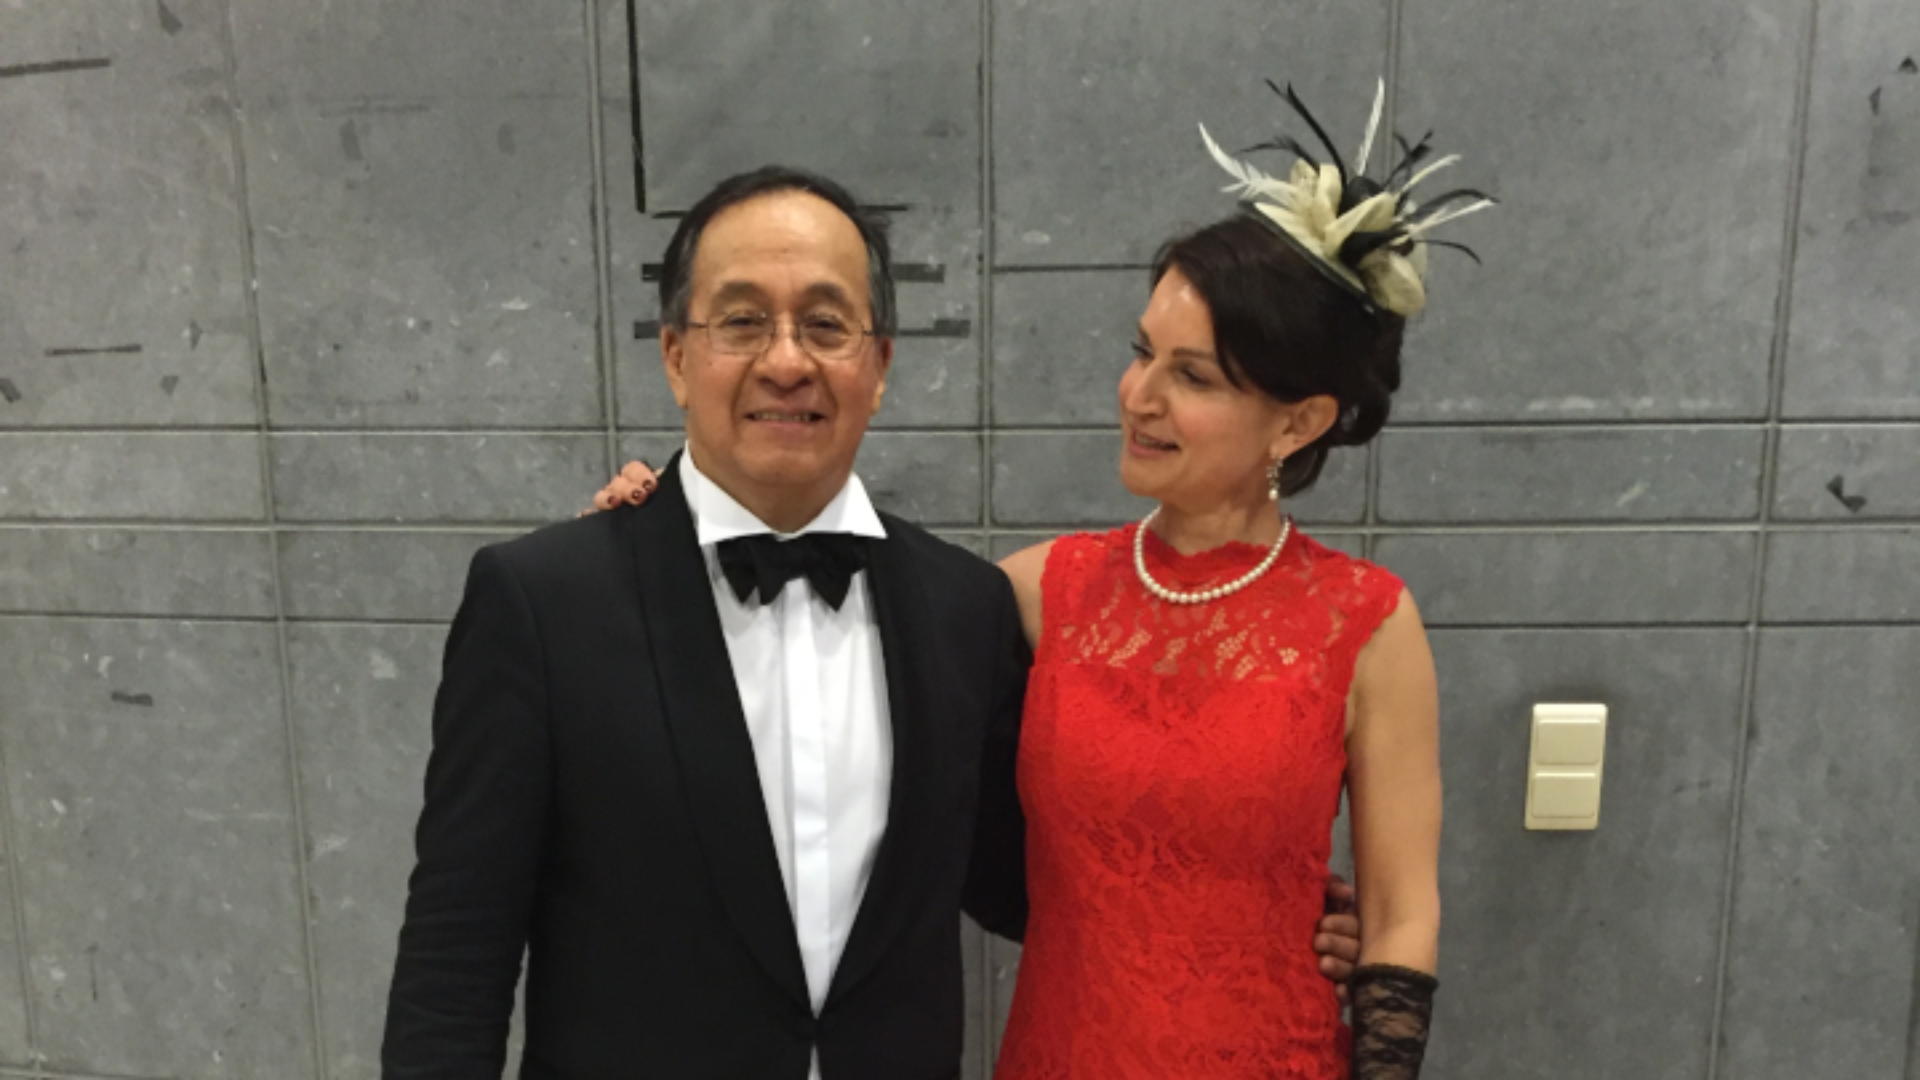 Royal Military Academy Ball 2016 - Brussels